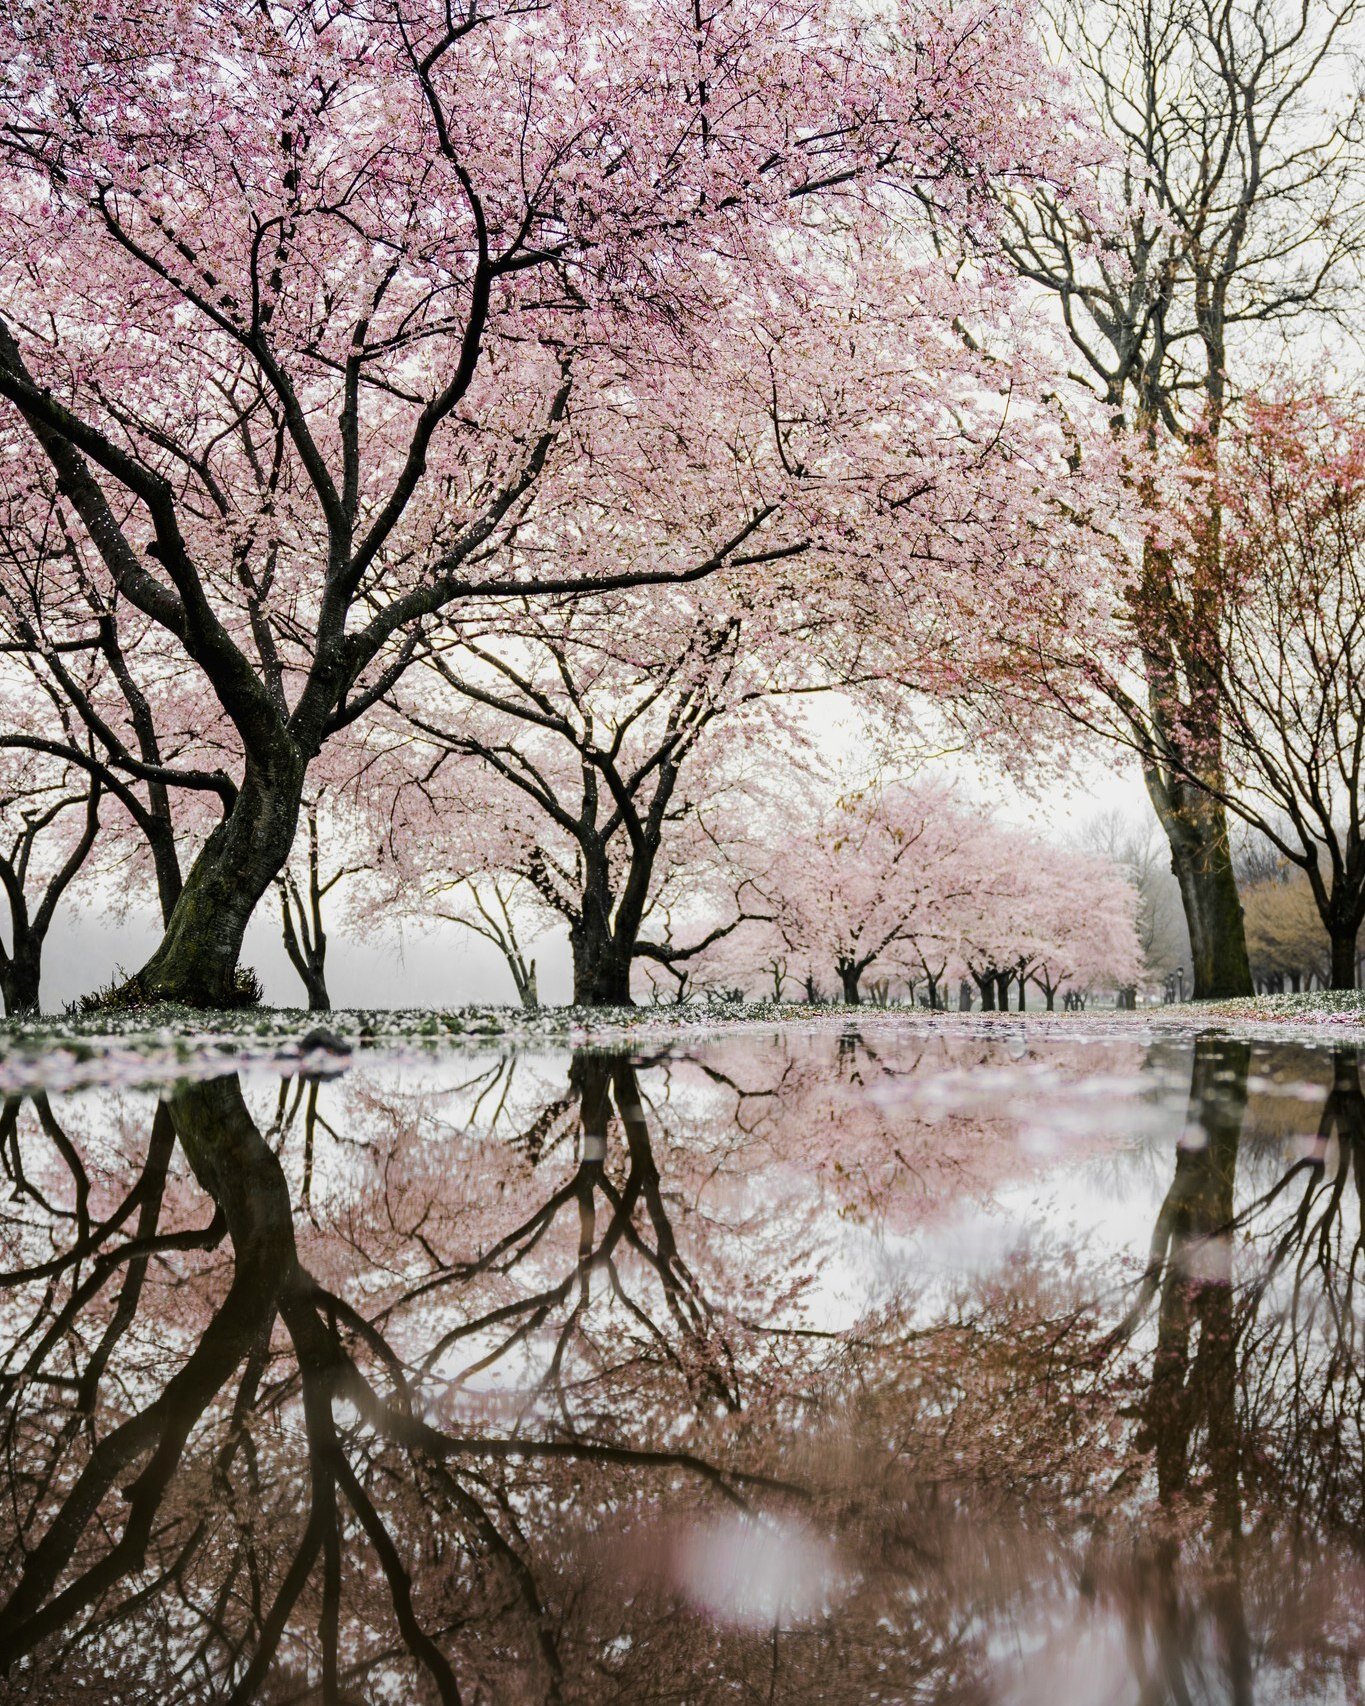 Spring is nearly upon us! Just today, I saw some of my local cherry blossom trees showing a whisper of pink, and before we know it they will be blossoming open in all of their springtime glory and painting the streets and sidewalks all around town th